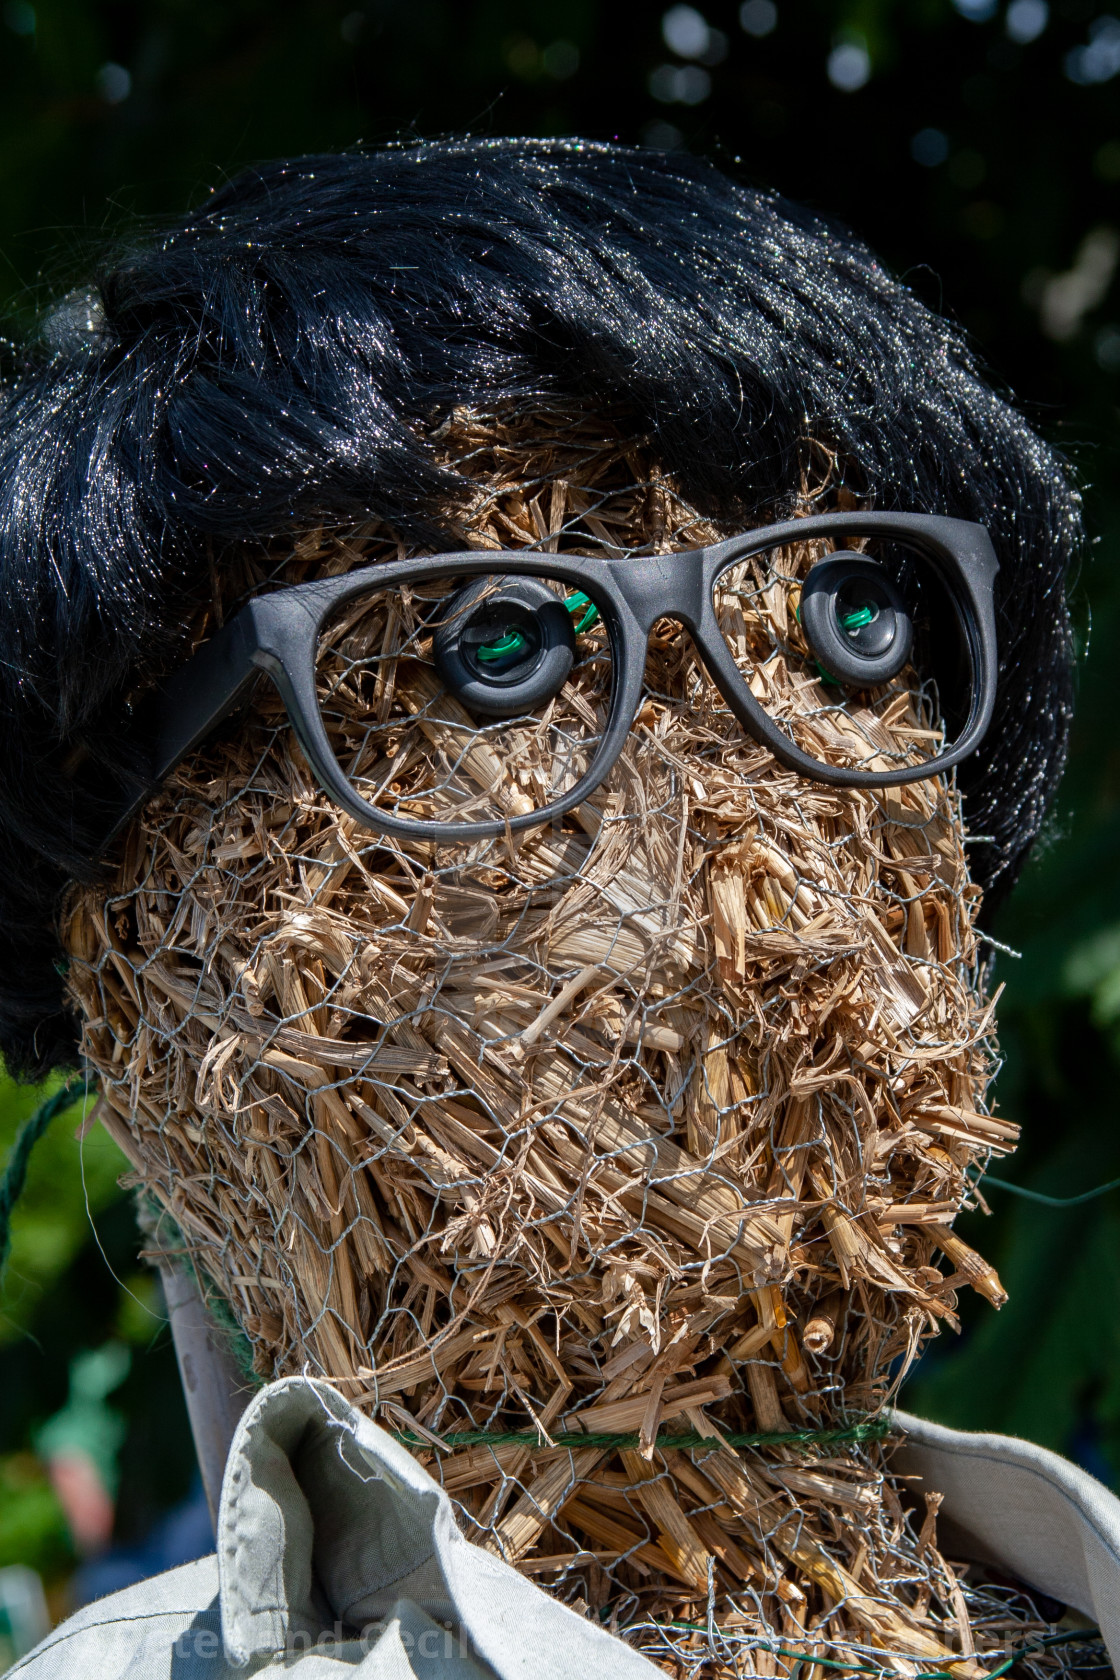 "Kettlewell Scarecrow Festival and Trail, Straw Scarecrow Head. Yorkshire Dales, England." stock image